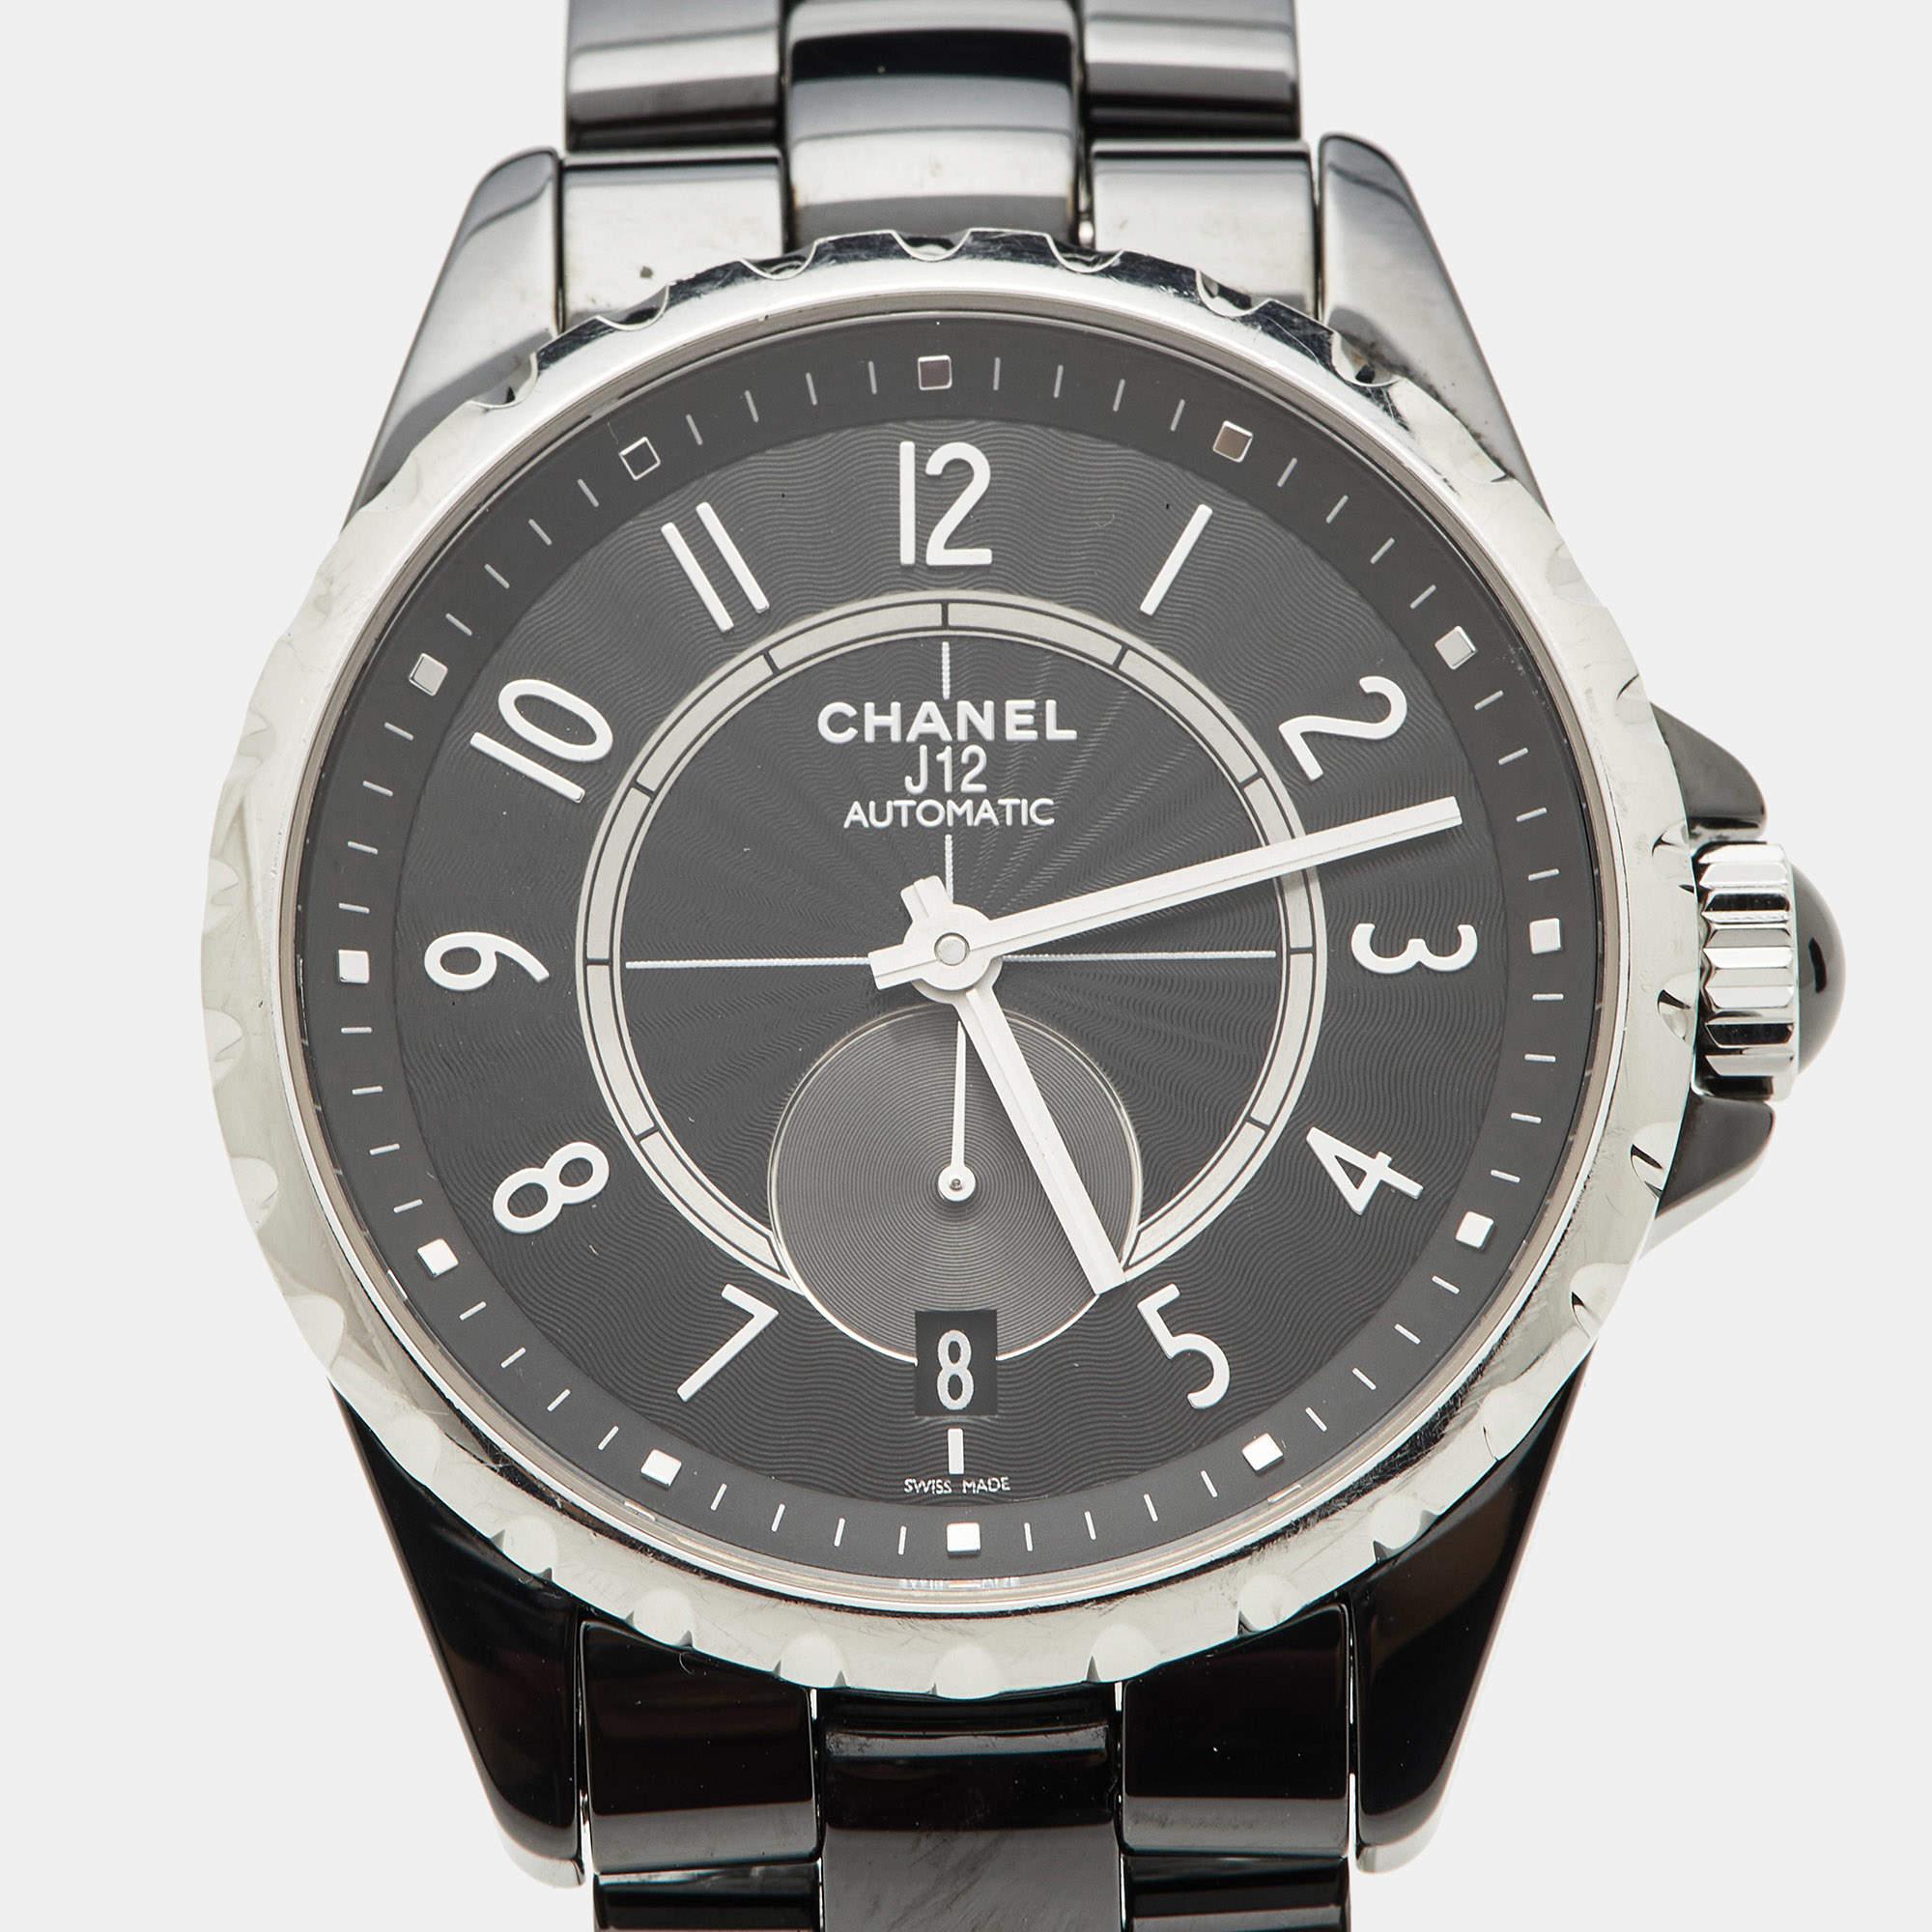 The Chanel J12 H03836 wristwatch is a stunning timepiece that exudes elegance and modernity. Its black ceramic case and bracelet, complemented by stainless steel accents, create a sleek, sophisticated look. This watch combines a luxurious design